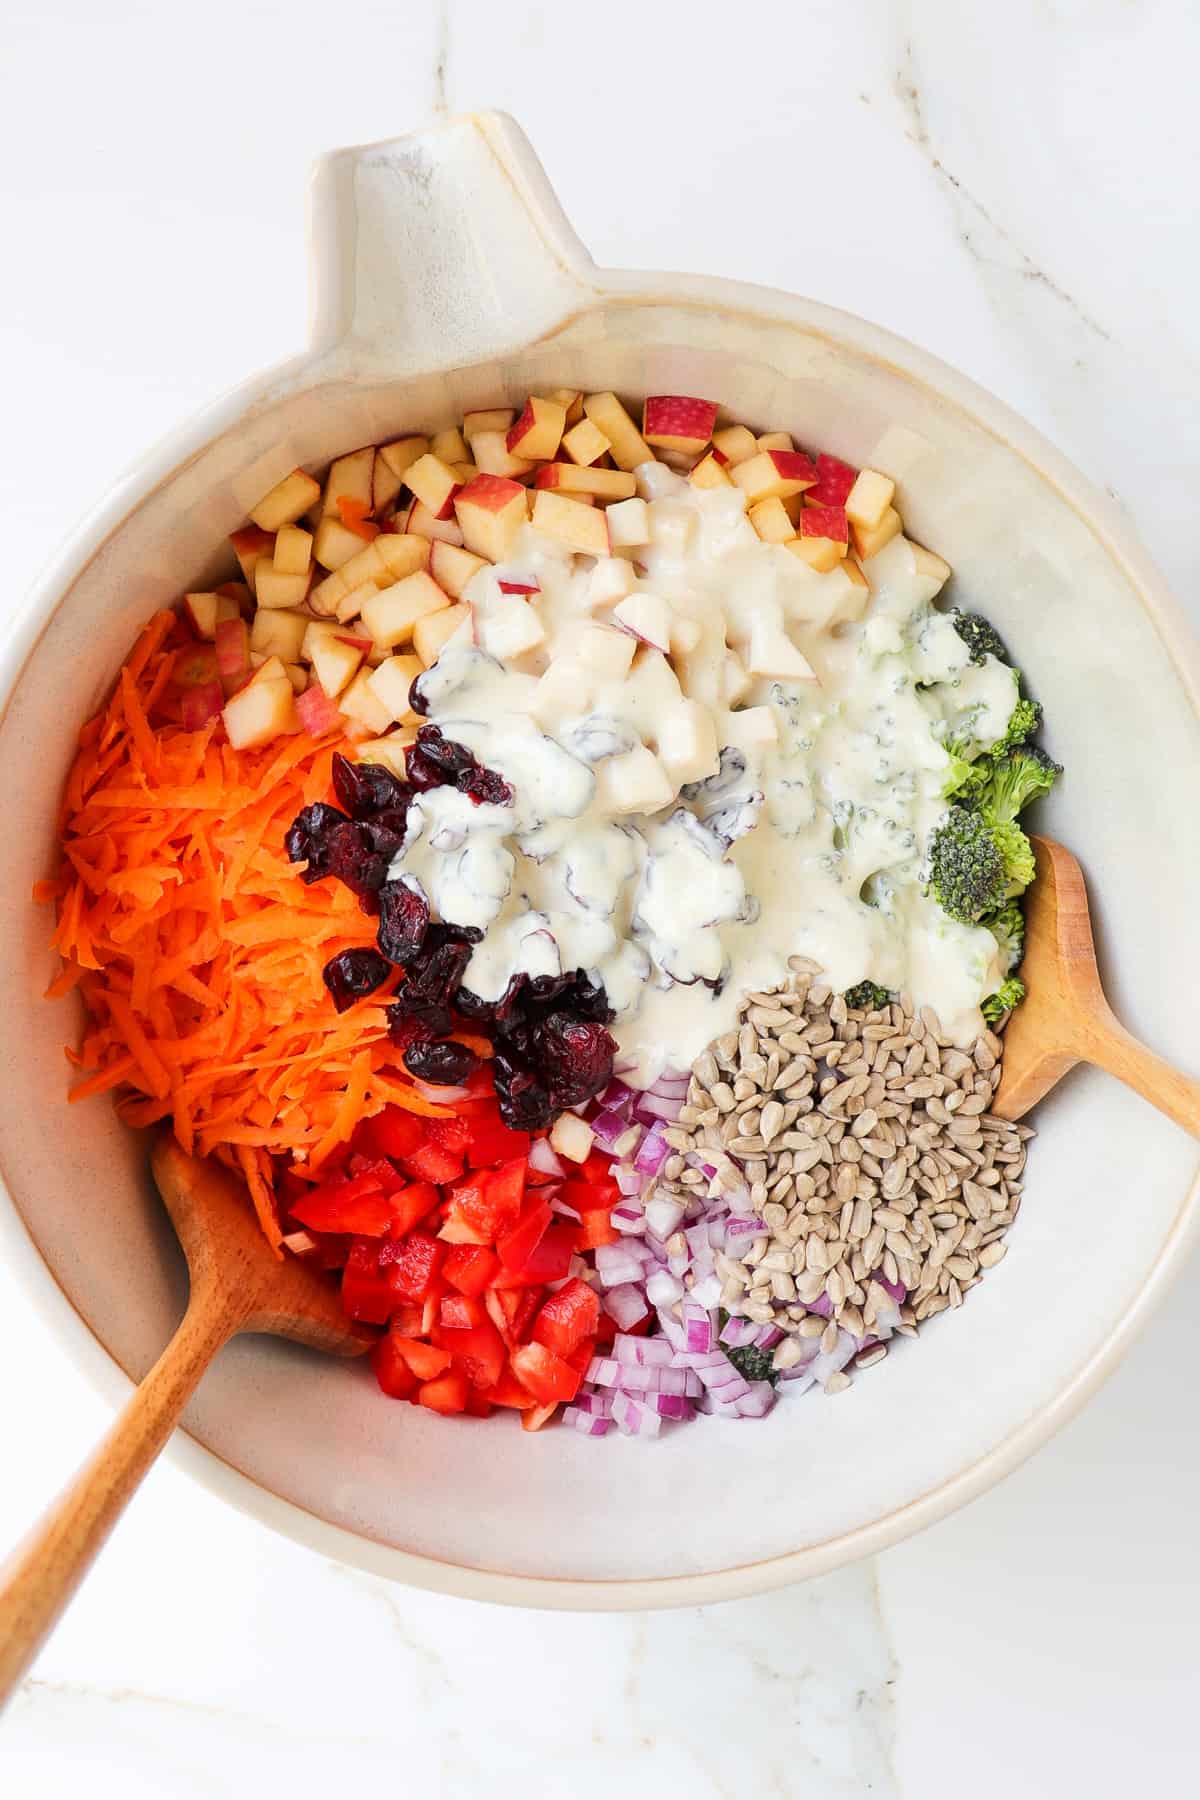 Salad ingredients in a bowl with the dressing poured over.